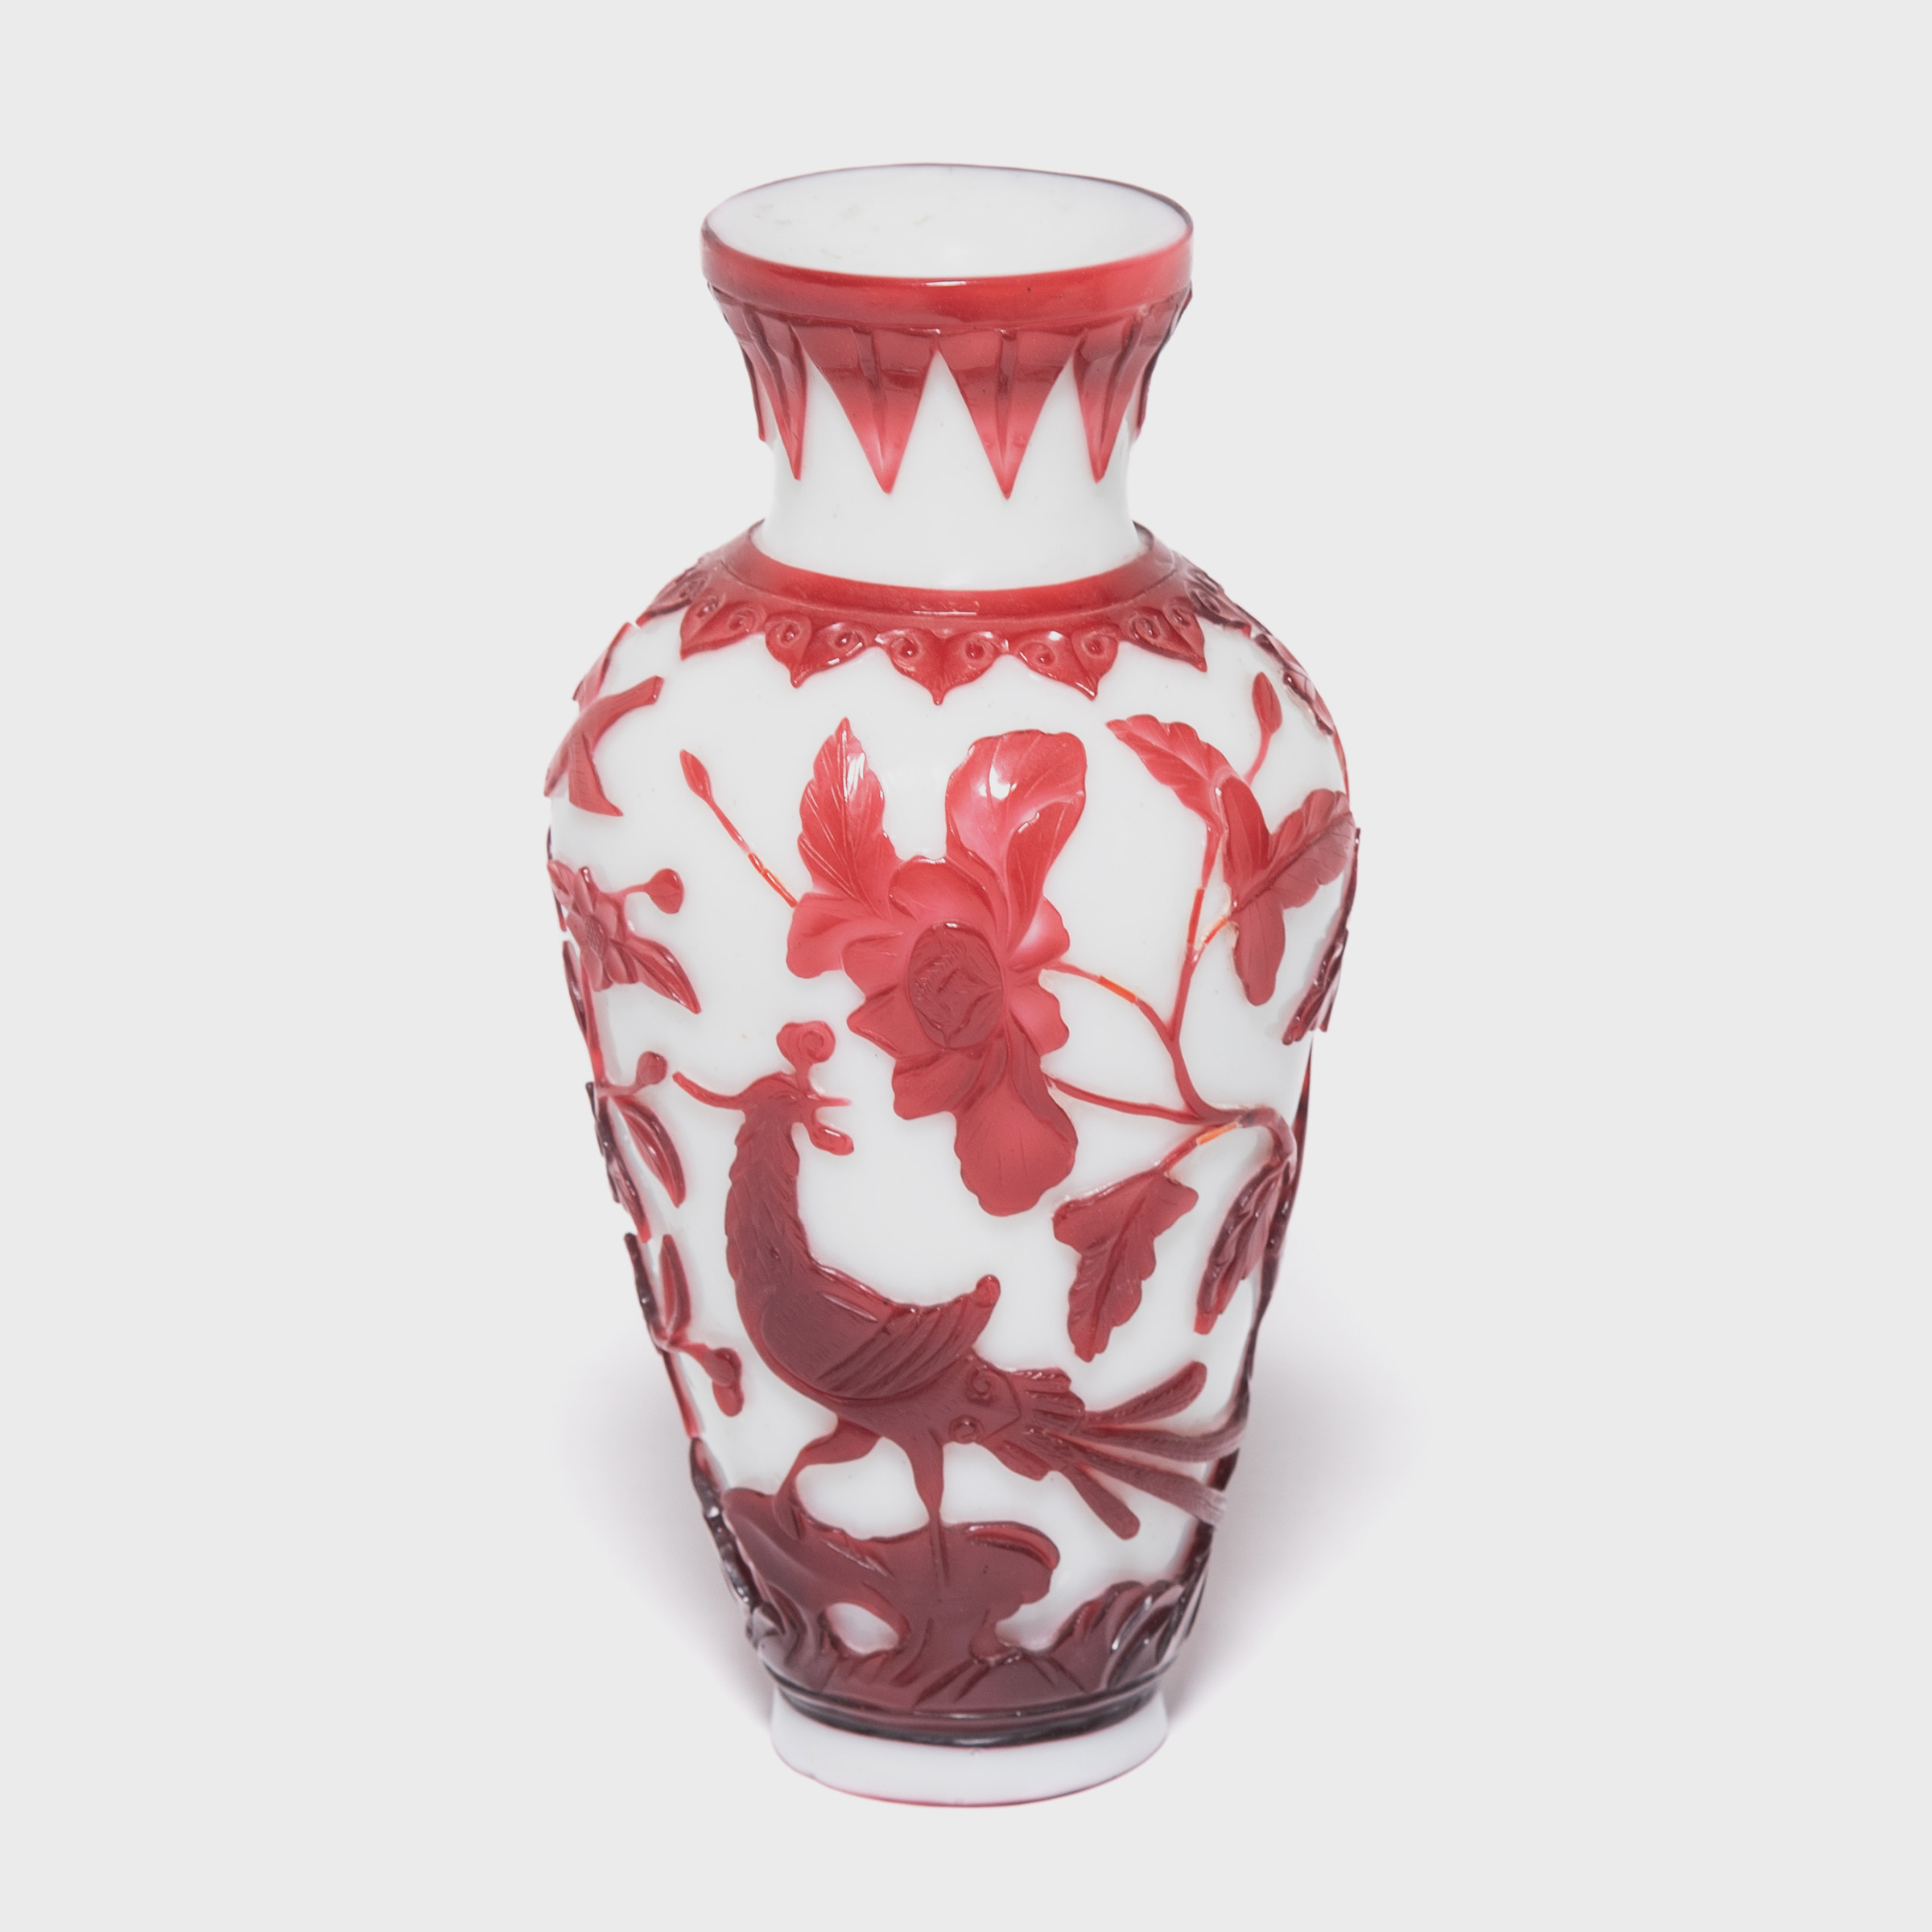 30 Lovable Peking Glass Vase for Sale 2024 free download peking glass vase for sale of peking glass blossom vase browse or buy at pagoda red for questions ask us